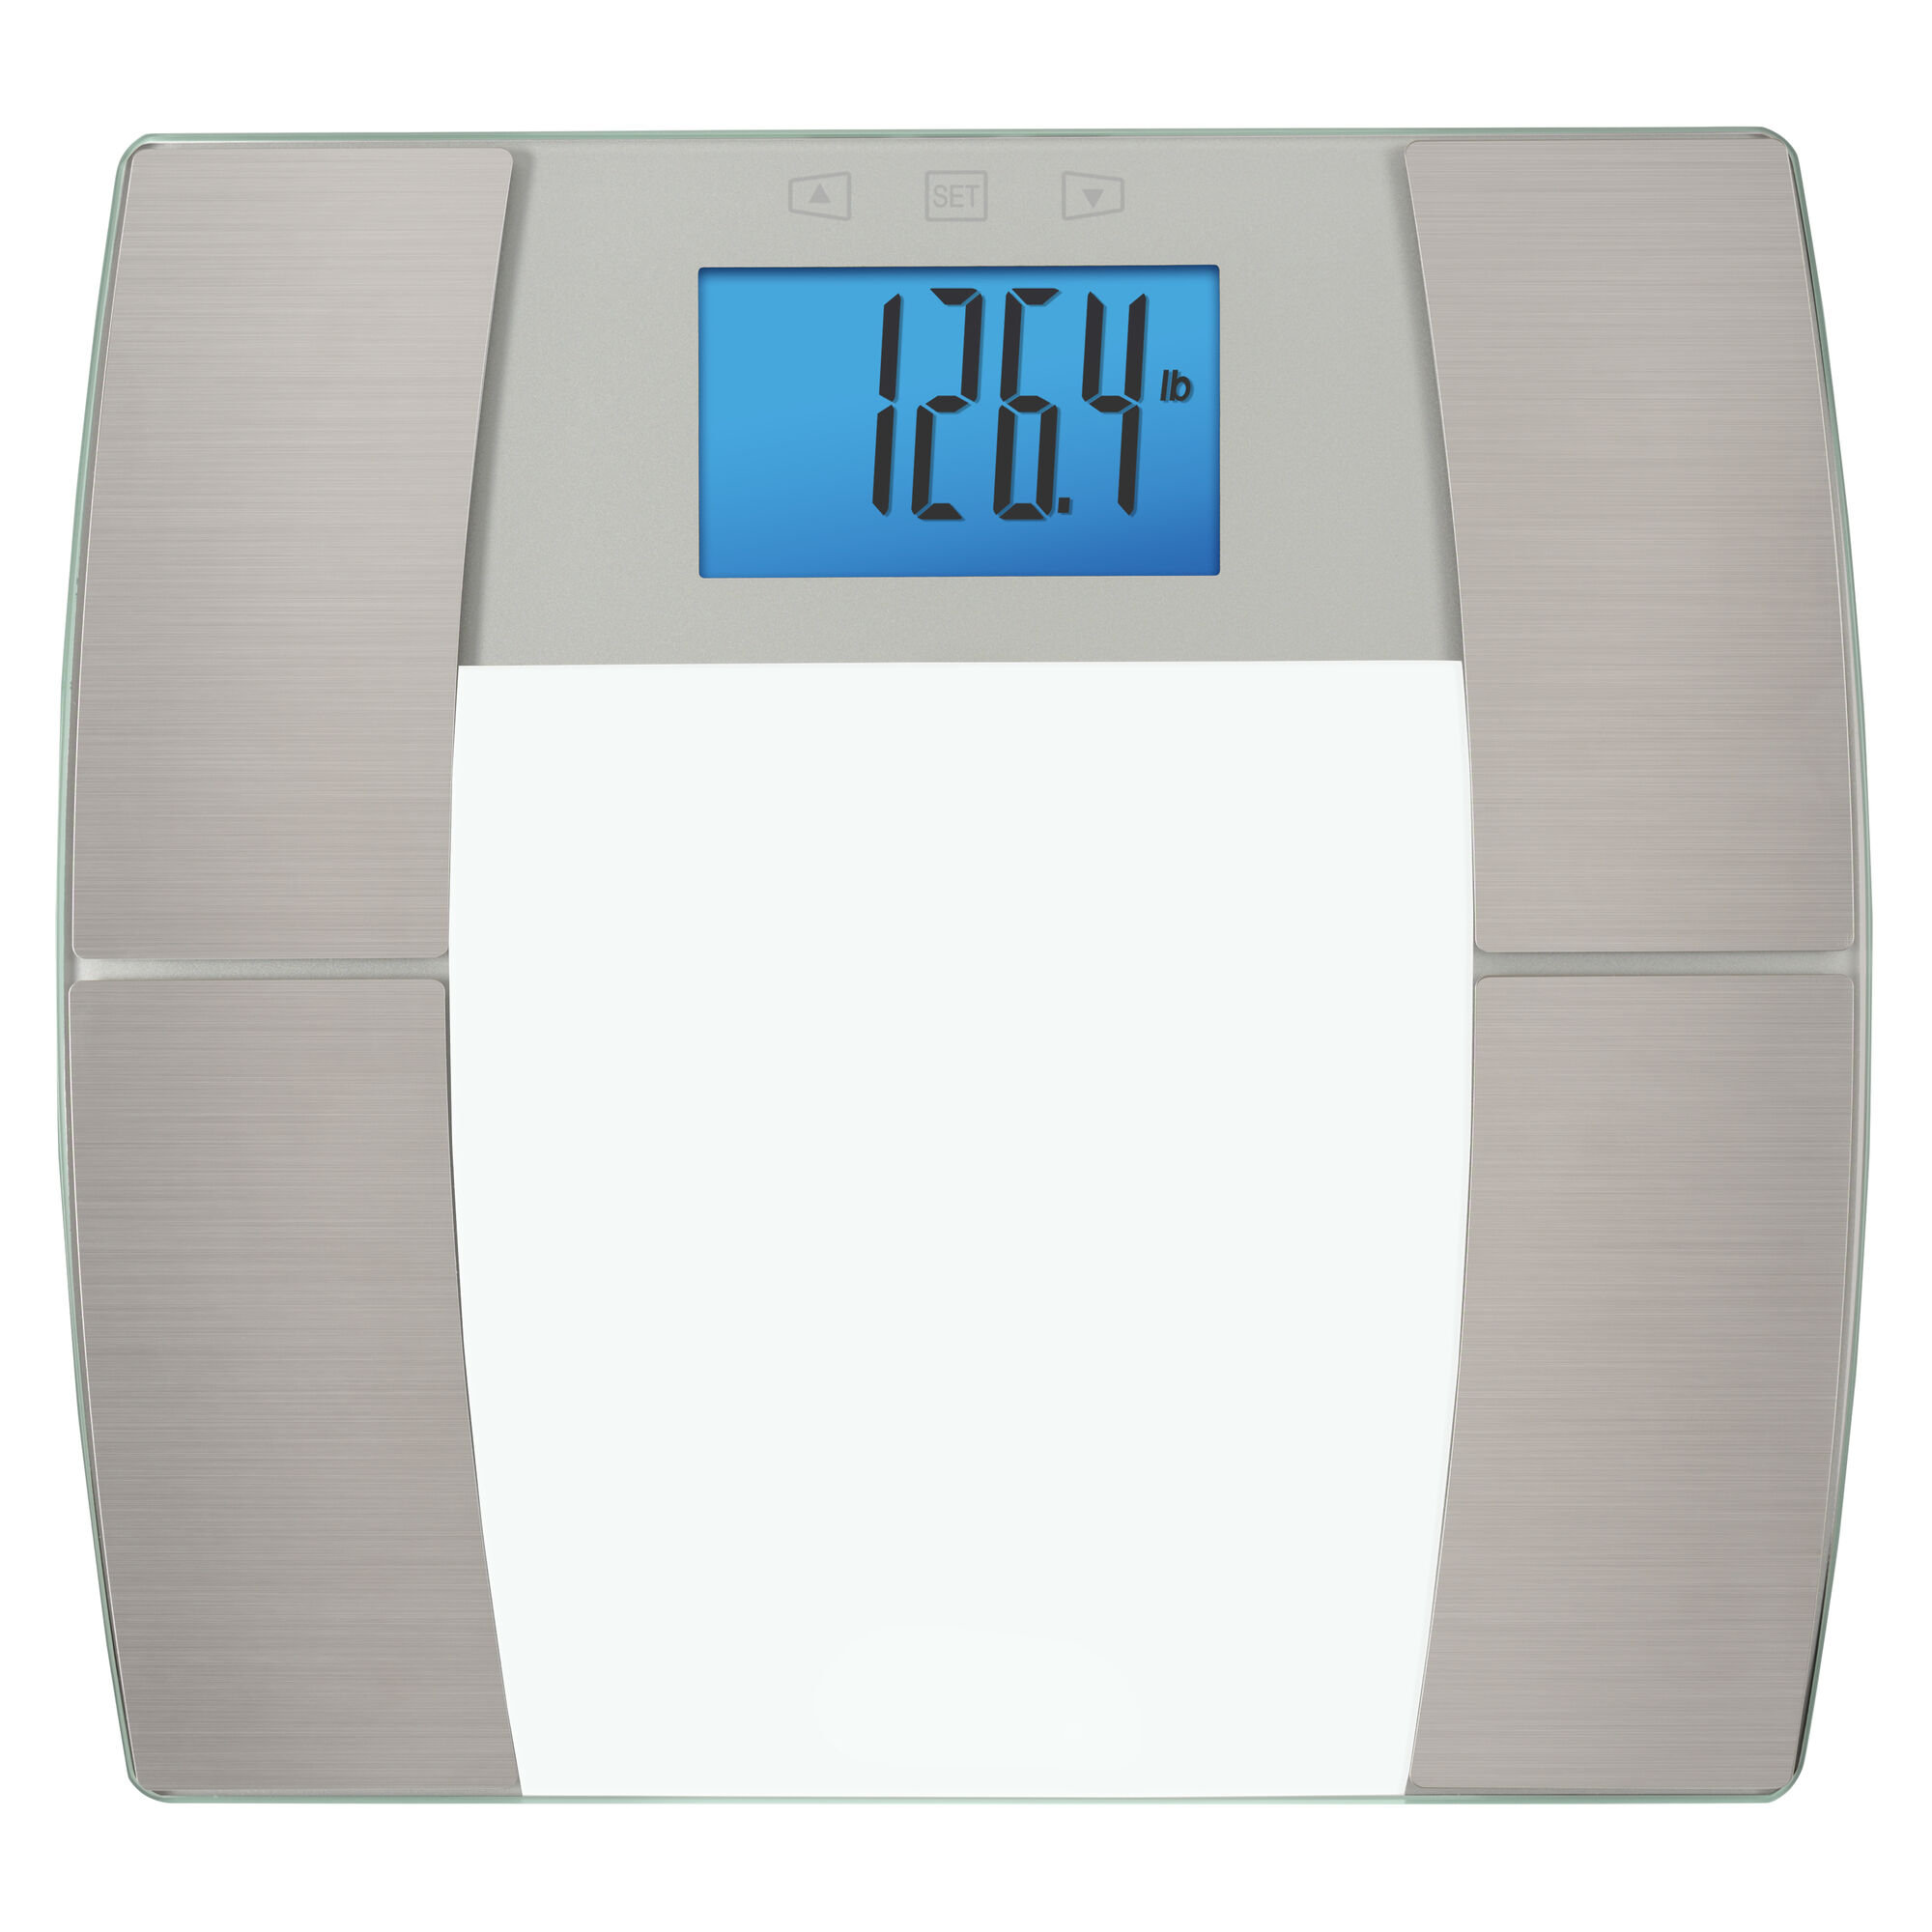  Eat Smart Precision Plus Digital Bathroom Scale with Ultra-Wide  Platform, 440 lb Capacity, Bath Scale for Body Weight, Grey : Office  Products